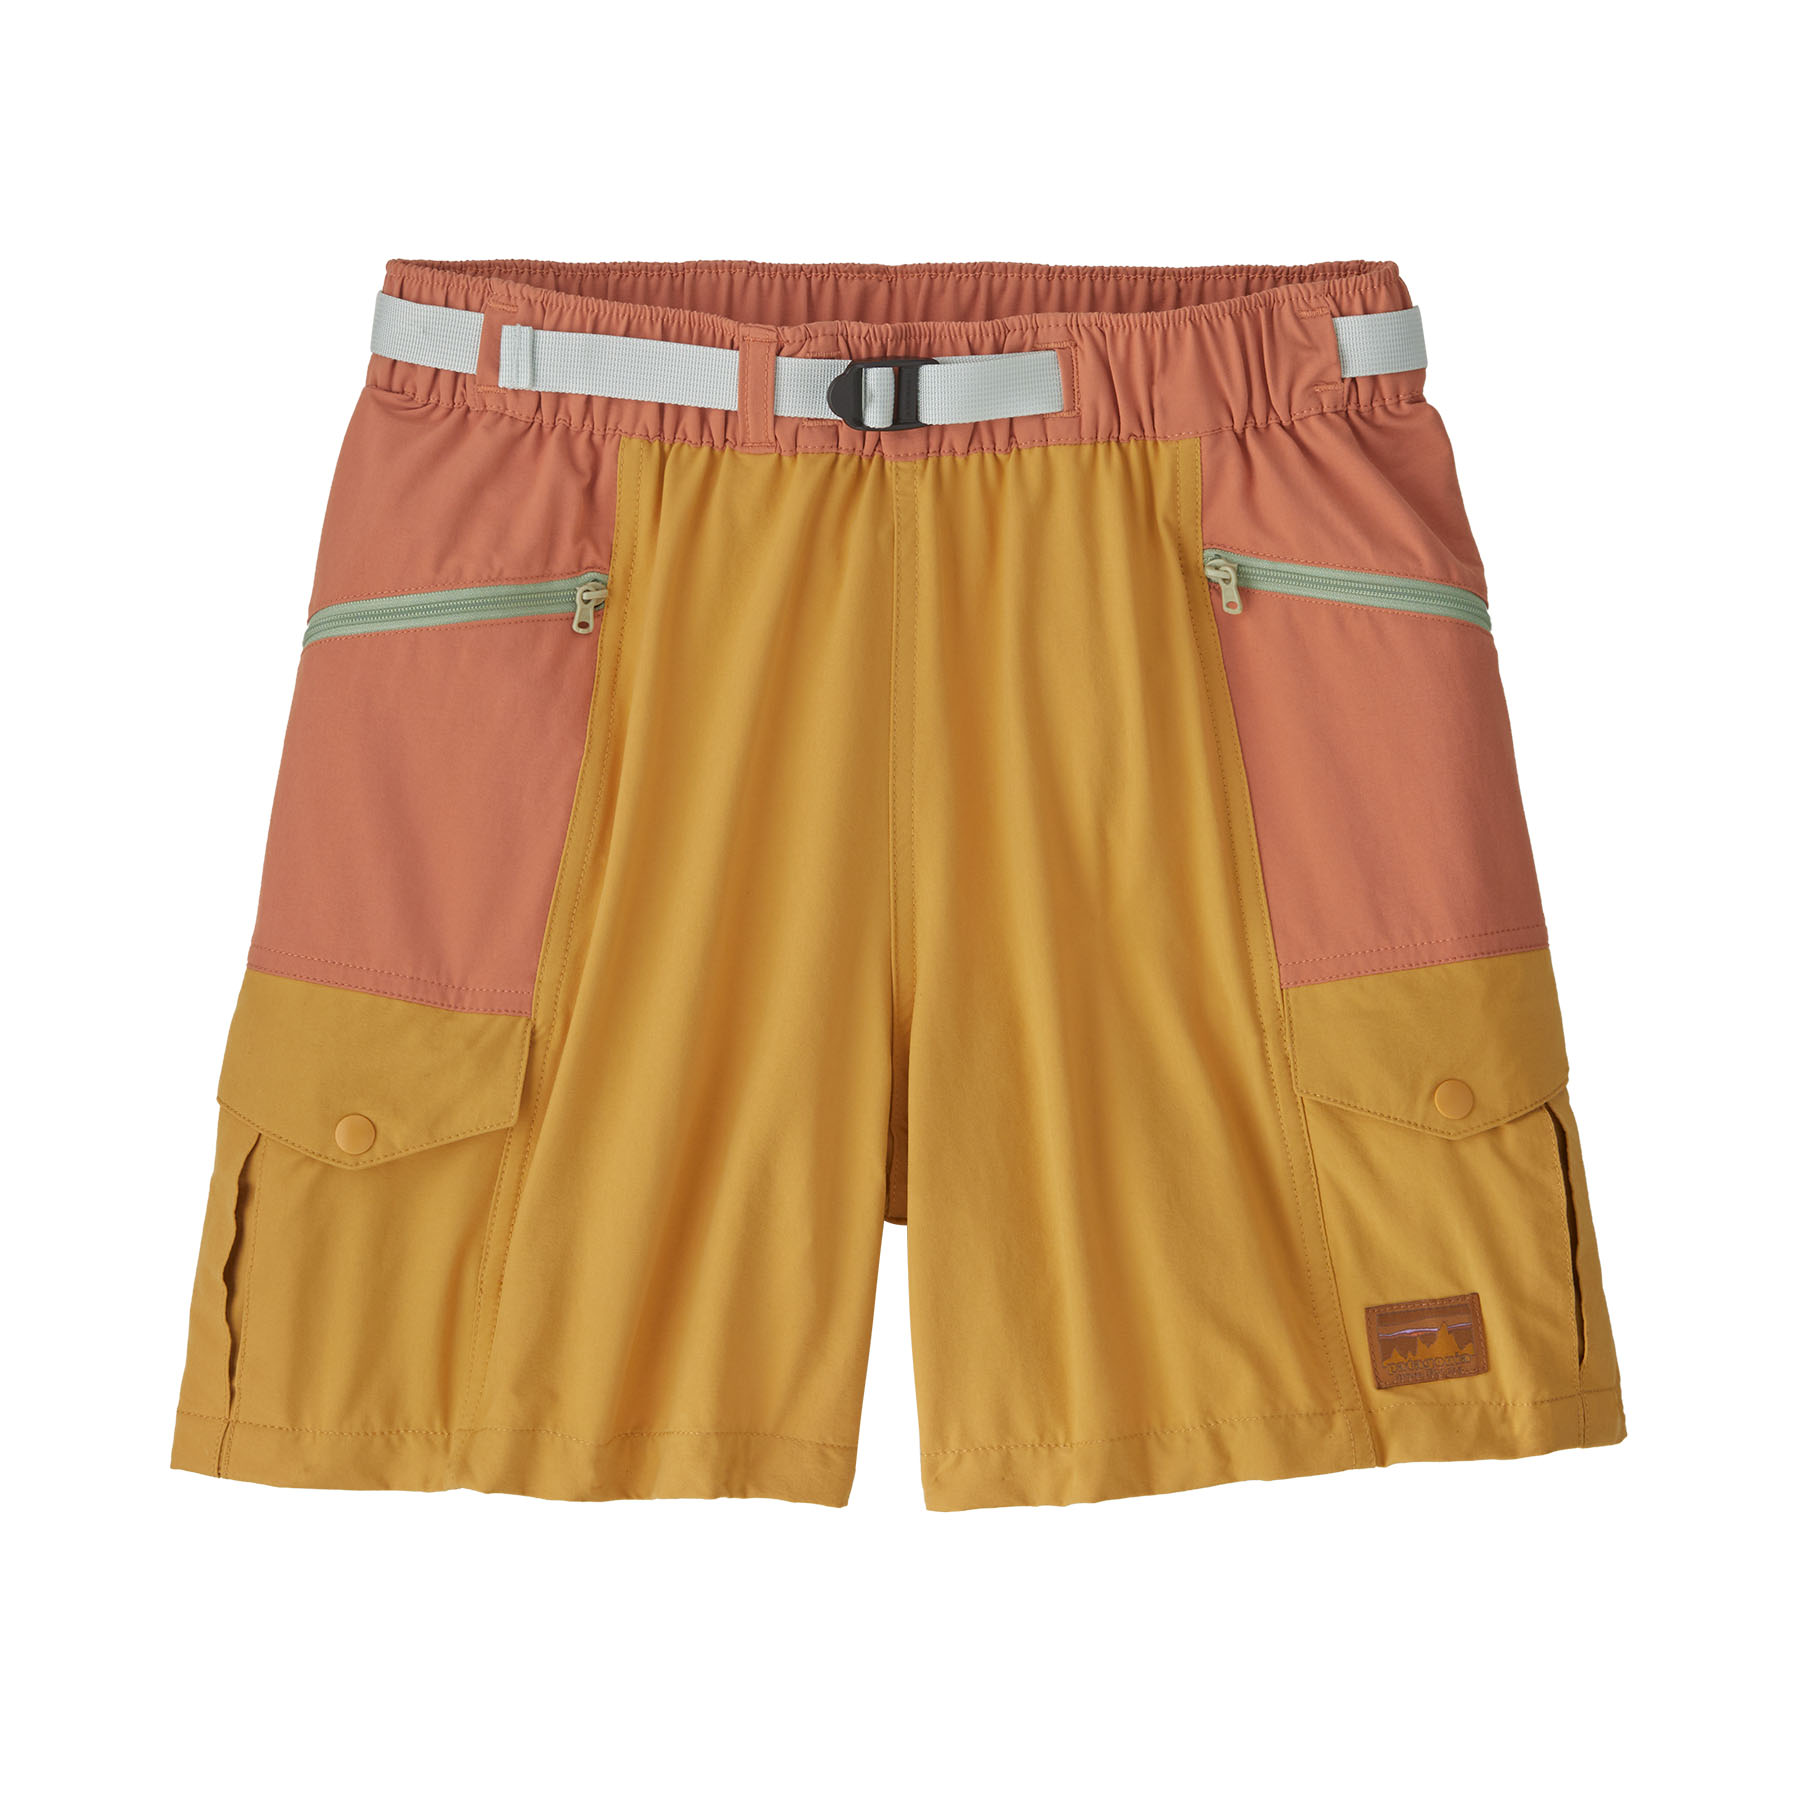 Patagonia Women’s Outdoor Everyday Shorts Pufferfish Gold